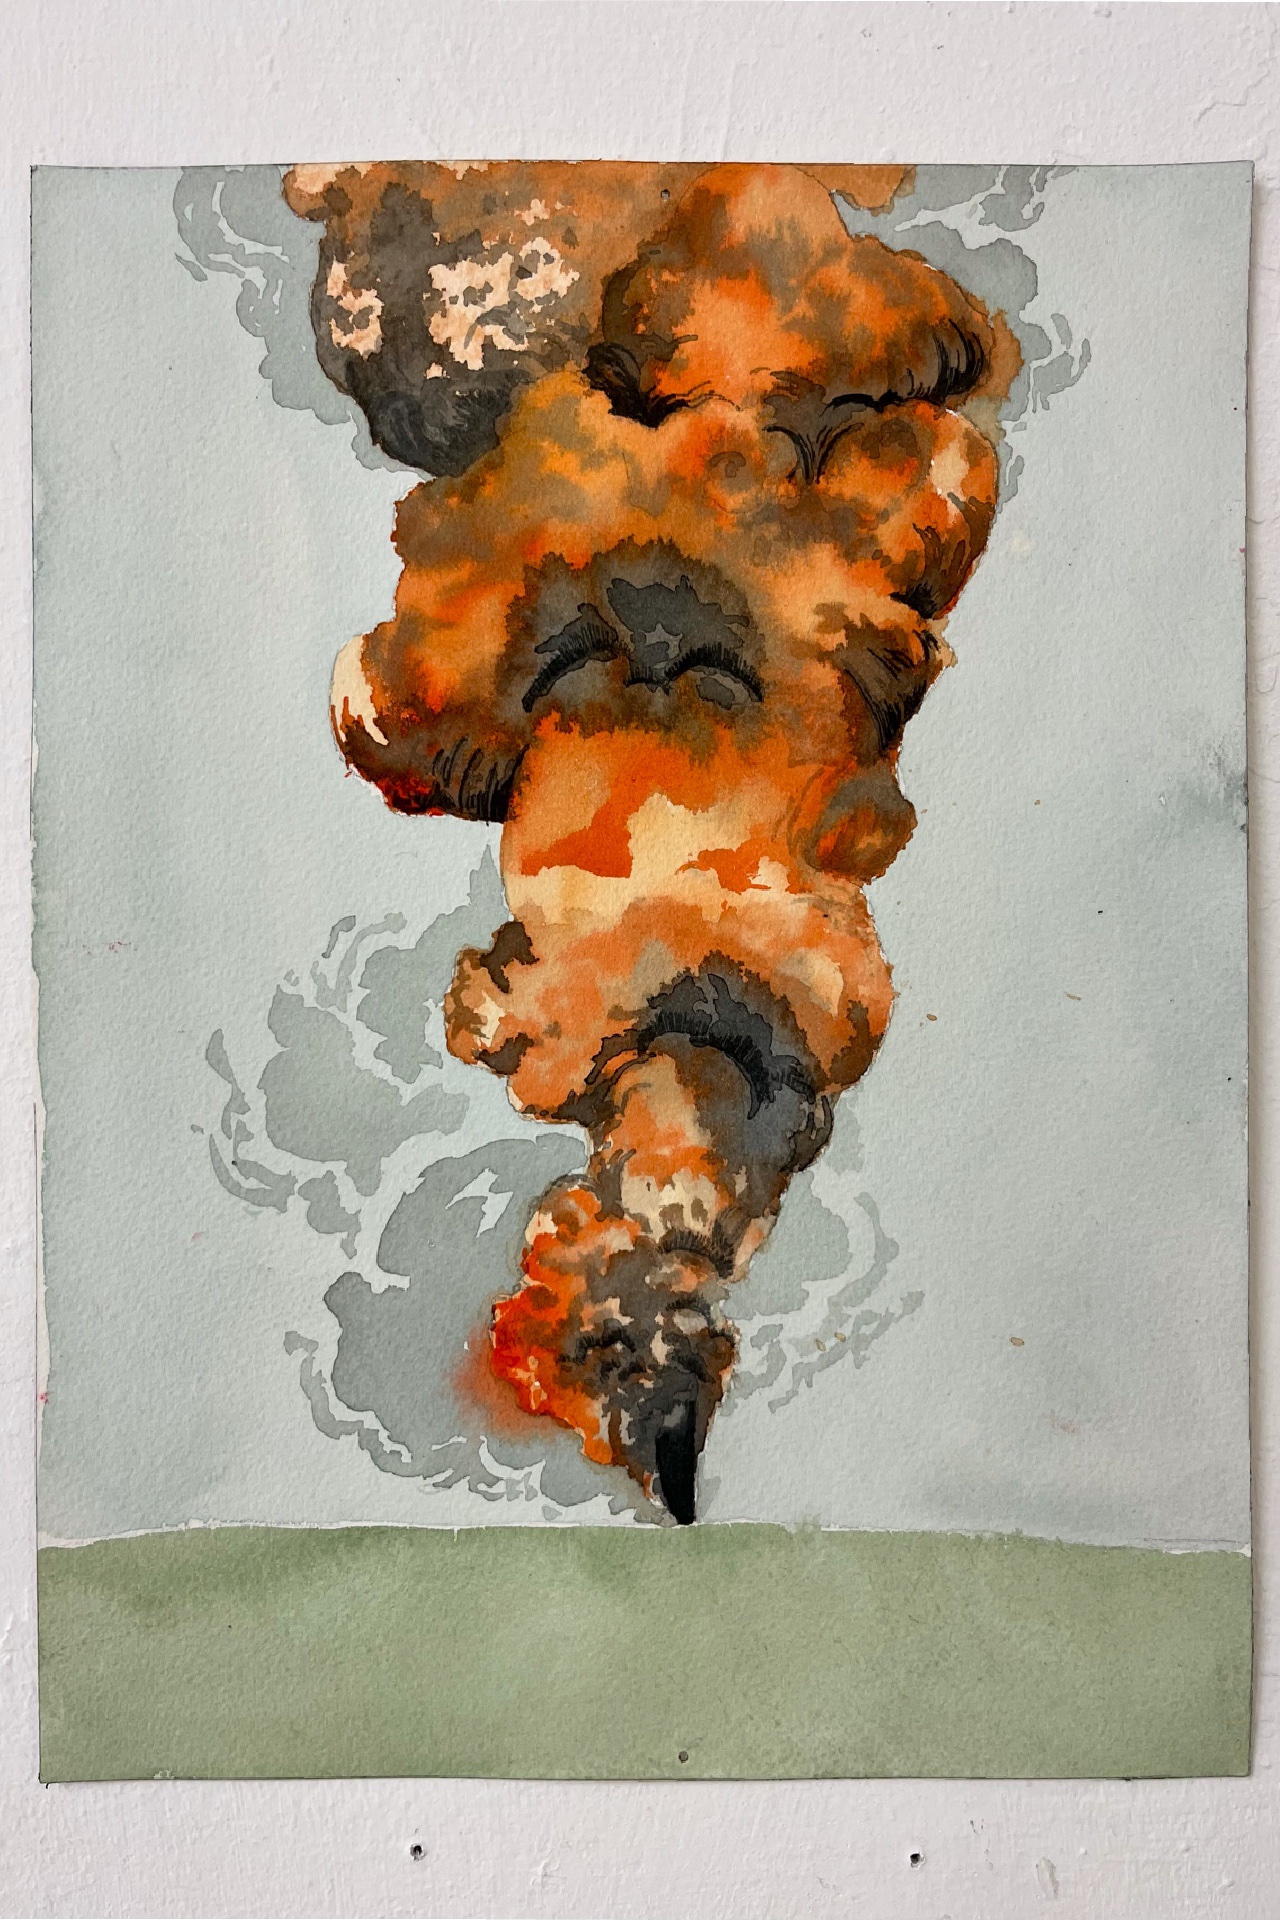 A watercolour study of a brightly burning oil well fire in a green field with a blue sky. The pillar of fire is fluid orange and grey, with controlled black hatching in the darkest areas. Clouds of grey smoke surround the heart of the fire.